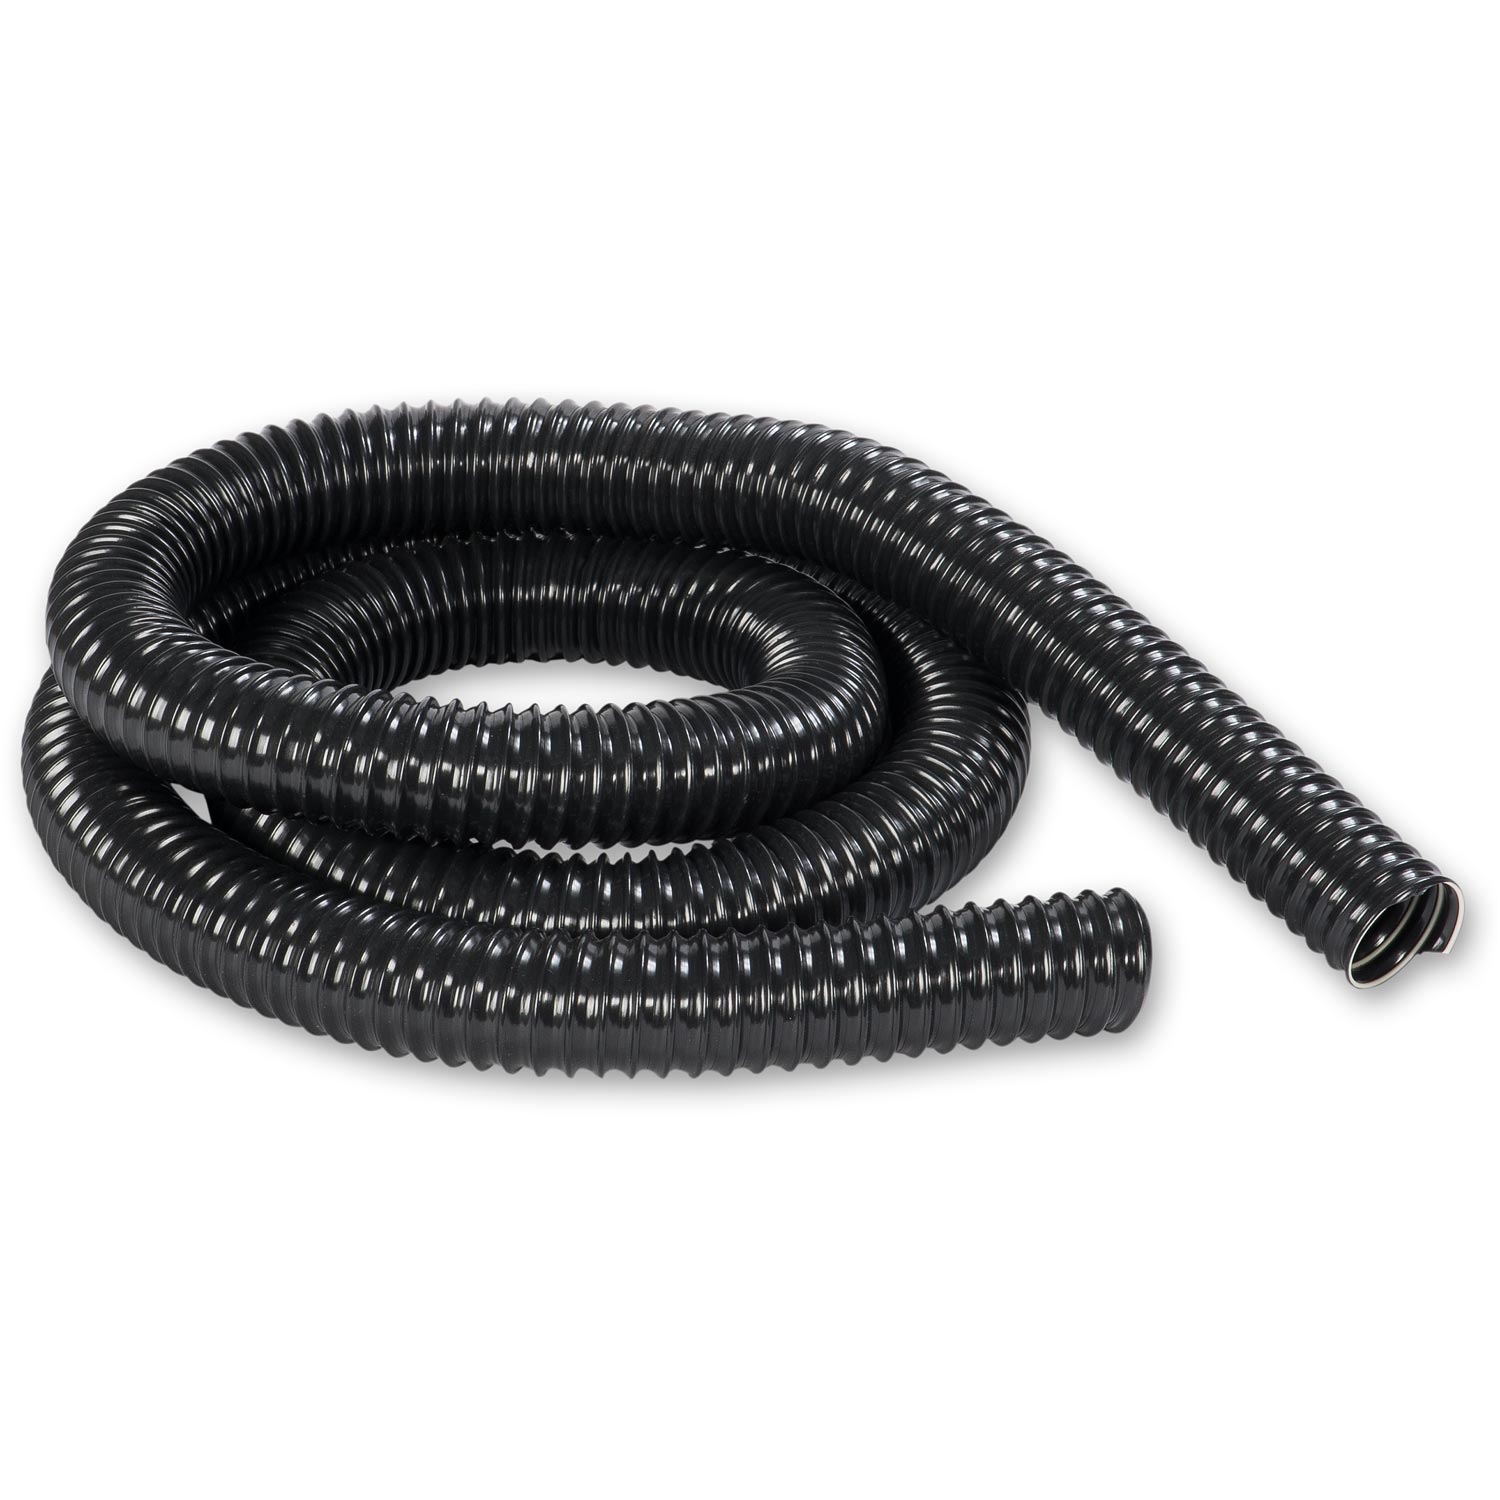 Axminster Workshop General Purpose Extraction Hose 38mm x 2.5m